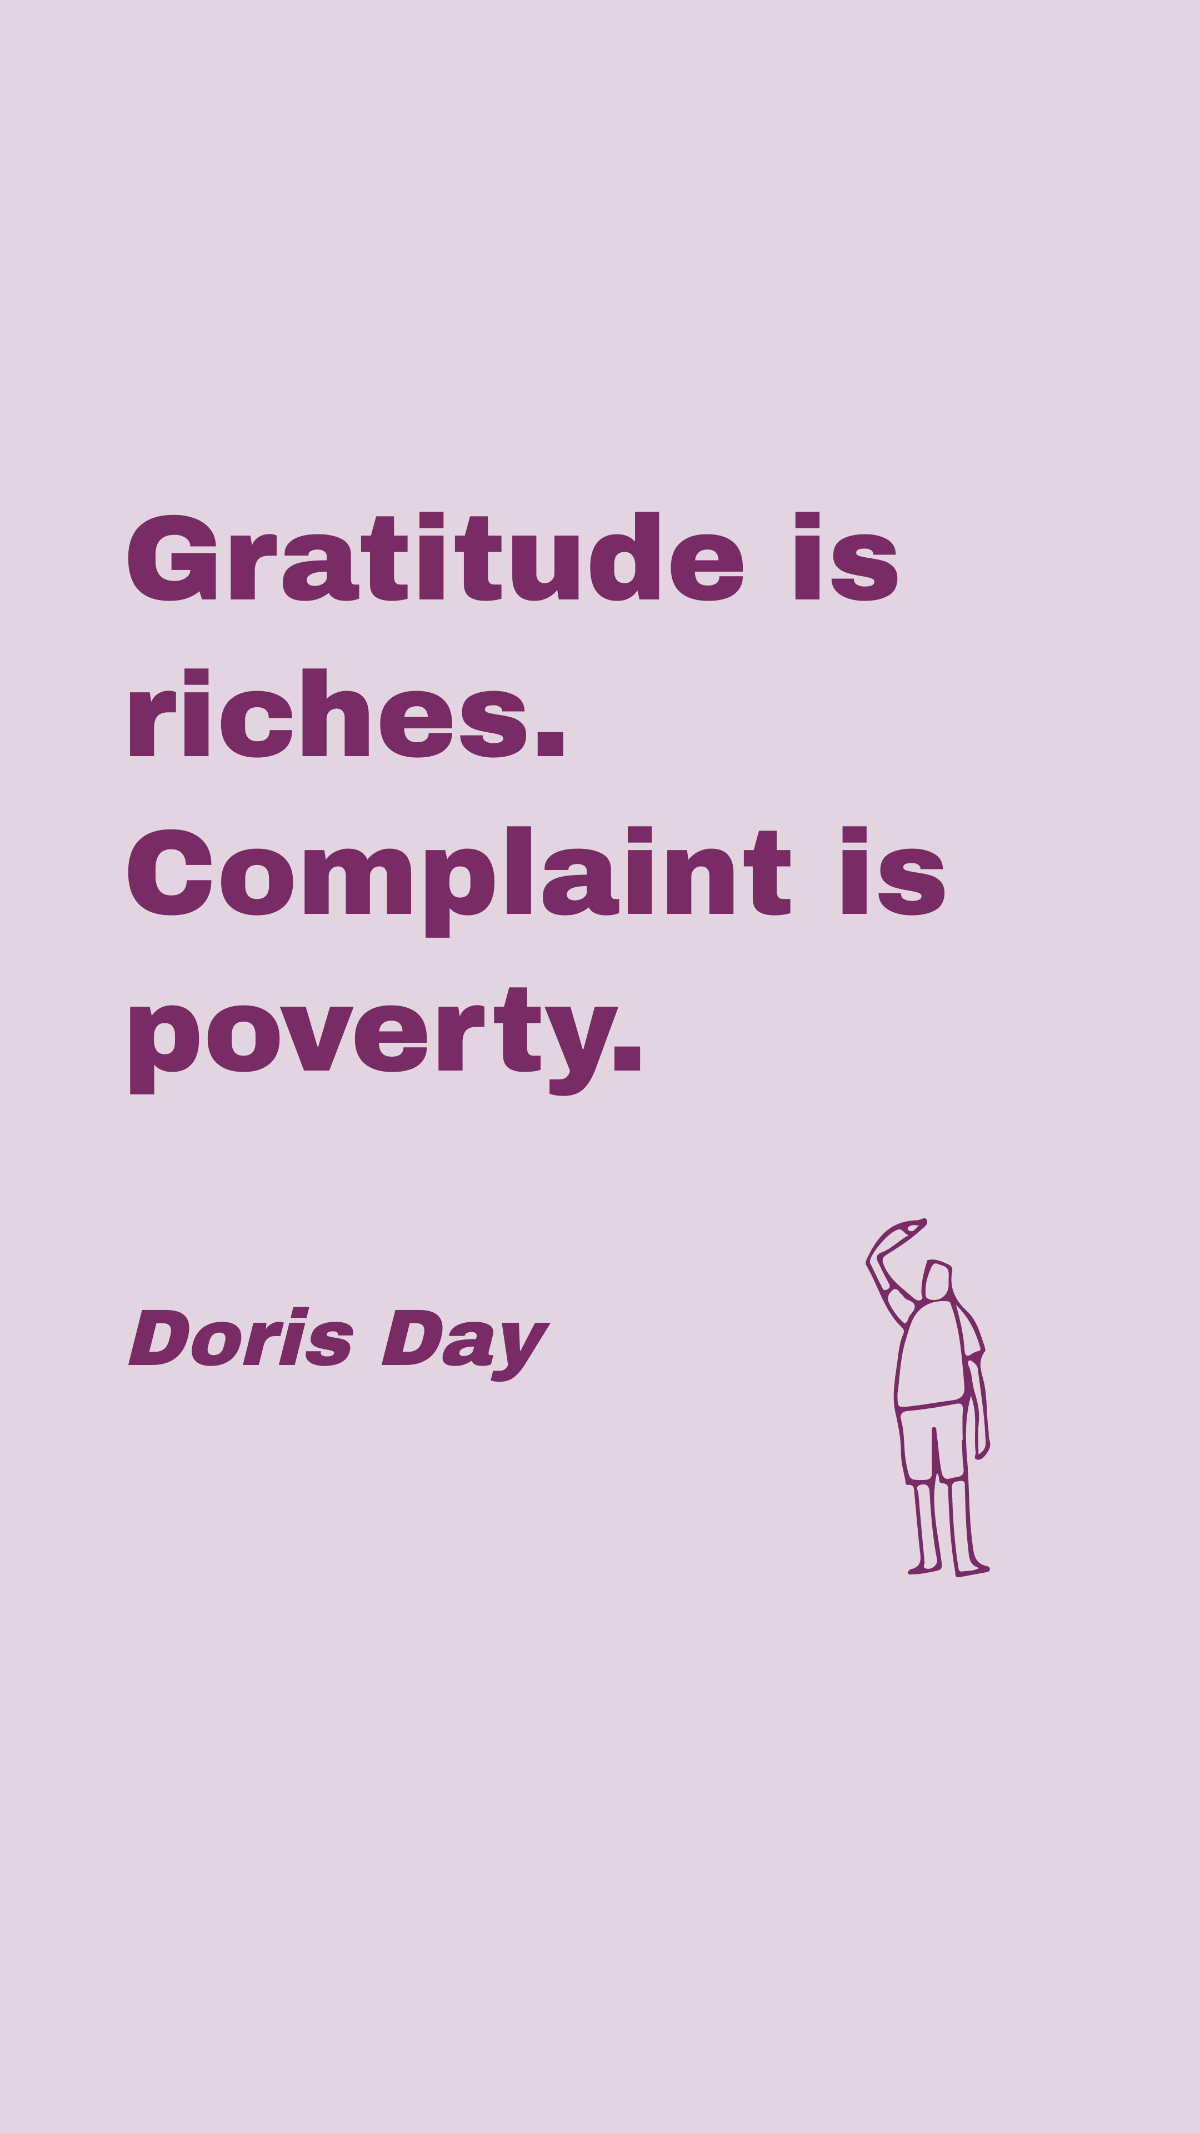 Free Doris Day - Gratitude is riches. Complaint is poverty. Template